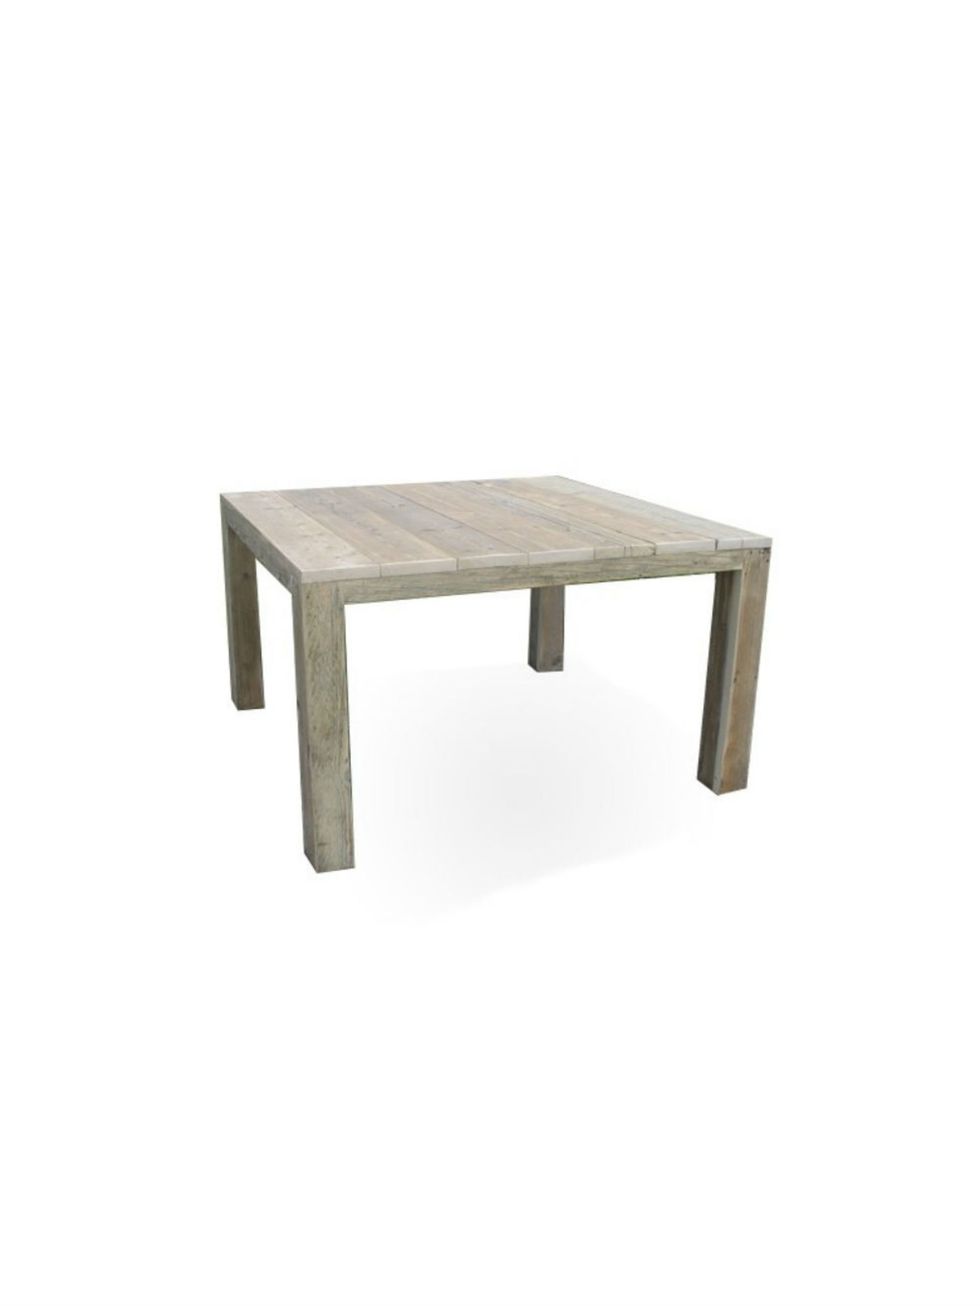 Wood, Table, Outdoor furniture, Grey, Rectangle, Beige, Composite material, Outdoor table, Wood stain, Concrete, 